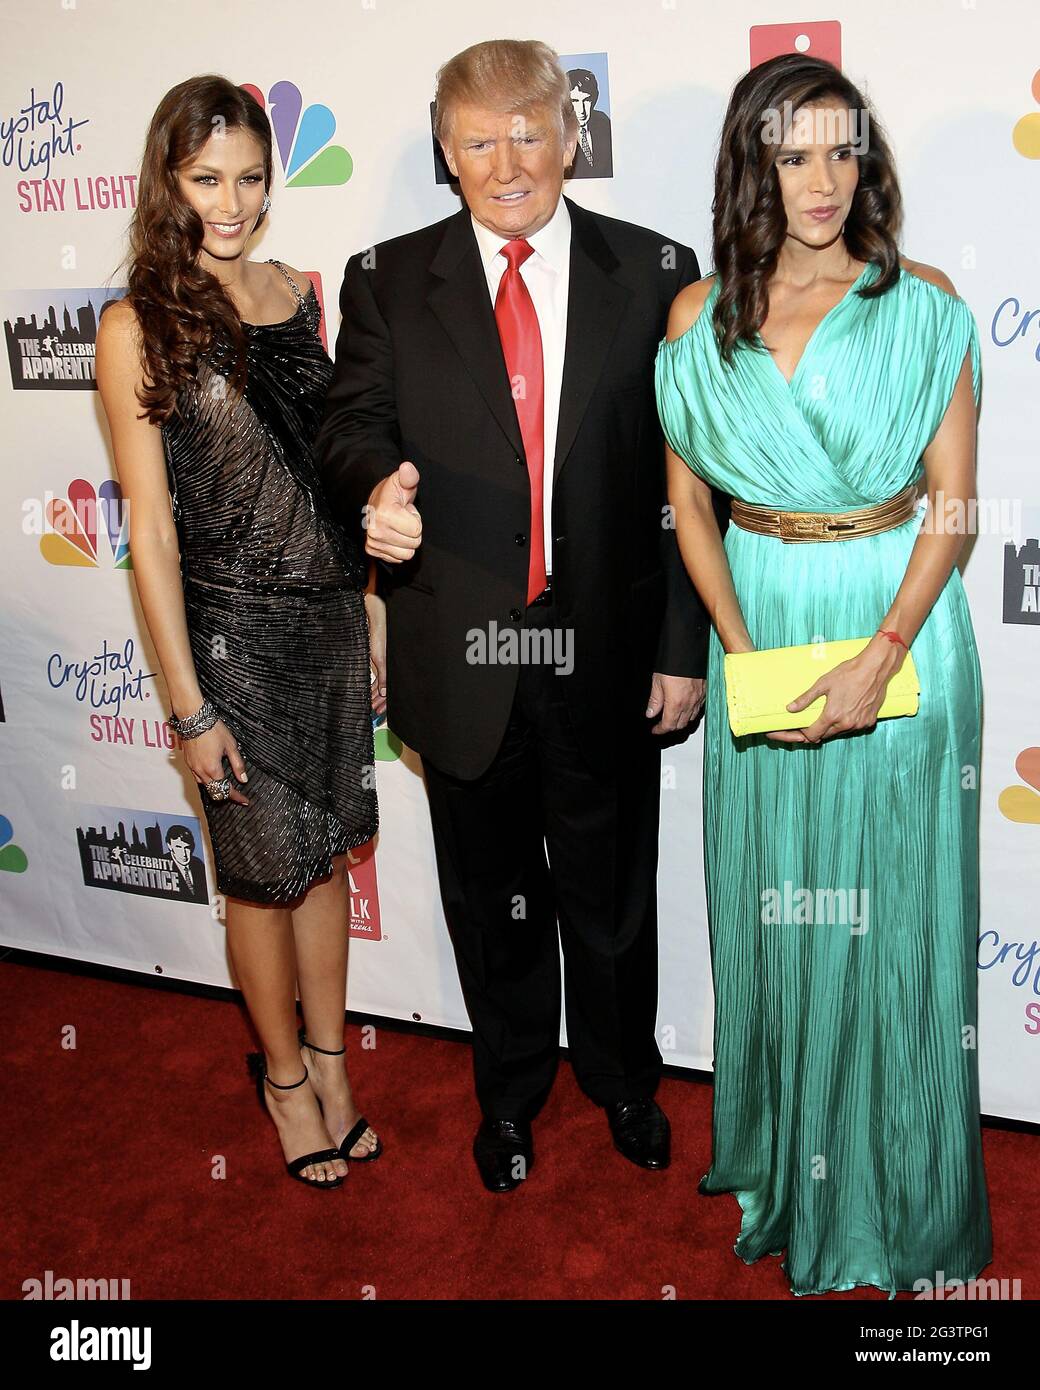 New York, NY, USA. 20 May, 2012. Dayana Mendoza, Donald Trump, Patricia Valesquez at the 'Celebrity Apprentice' Live Finale at The American Museum of Natural History. Credit: Steve Mack/Alamy Stock Photo